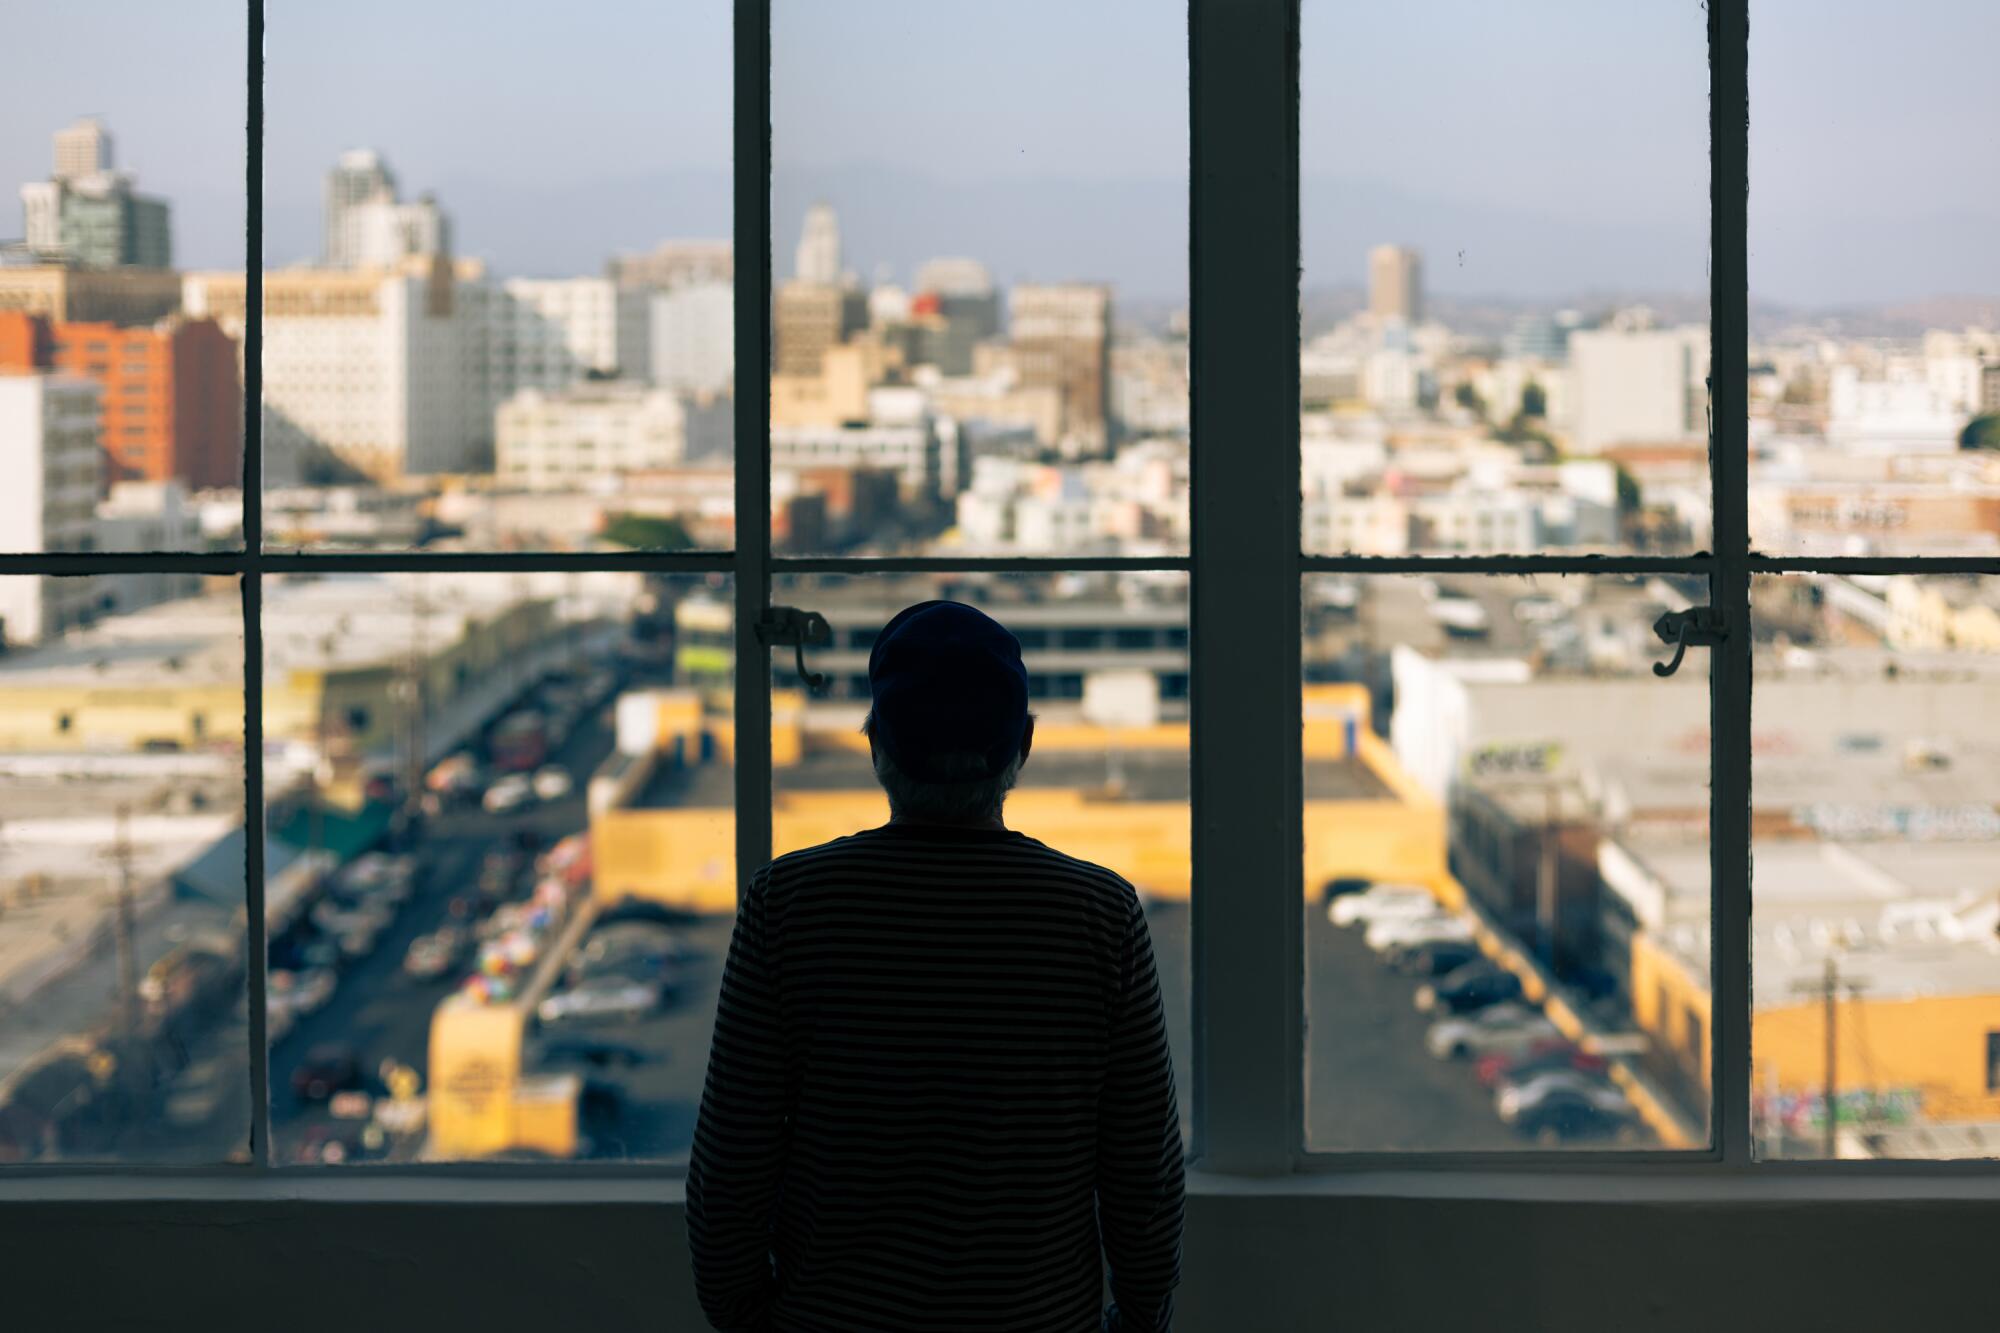 Robbie Conal, seen in silhouette, stands at a window overlooking downtown Los Angeles